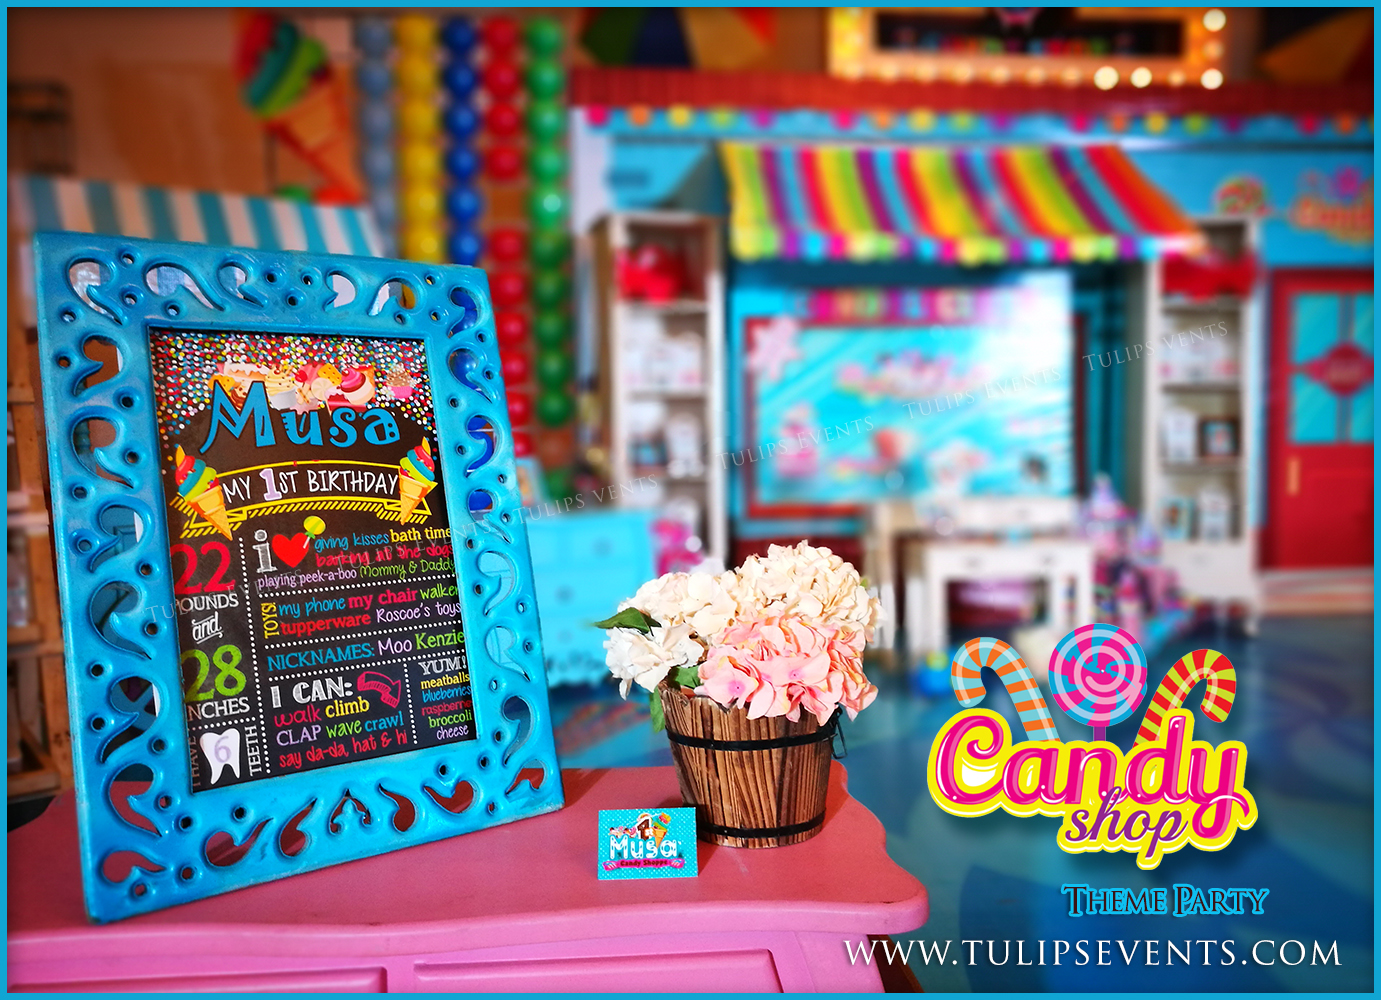 sweet-candy-shop-theme-birthday-party-decoration-ideas-in-pakistan-5